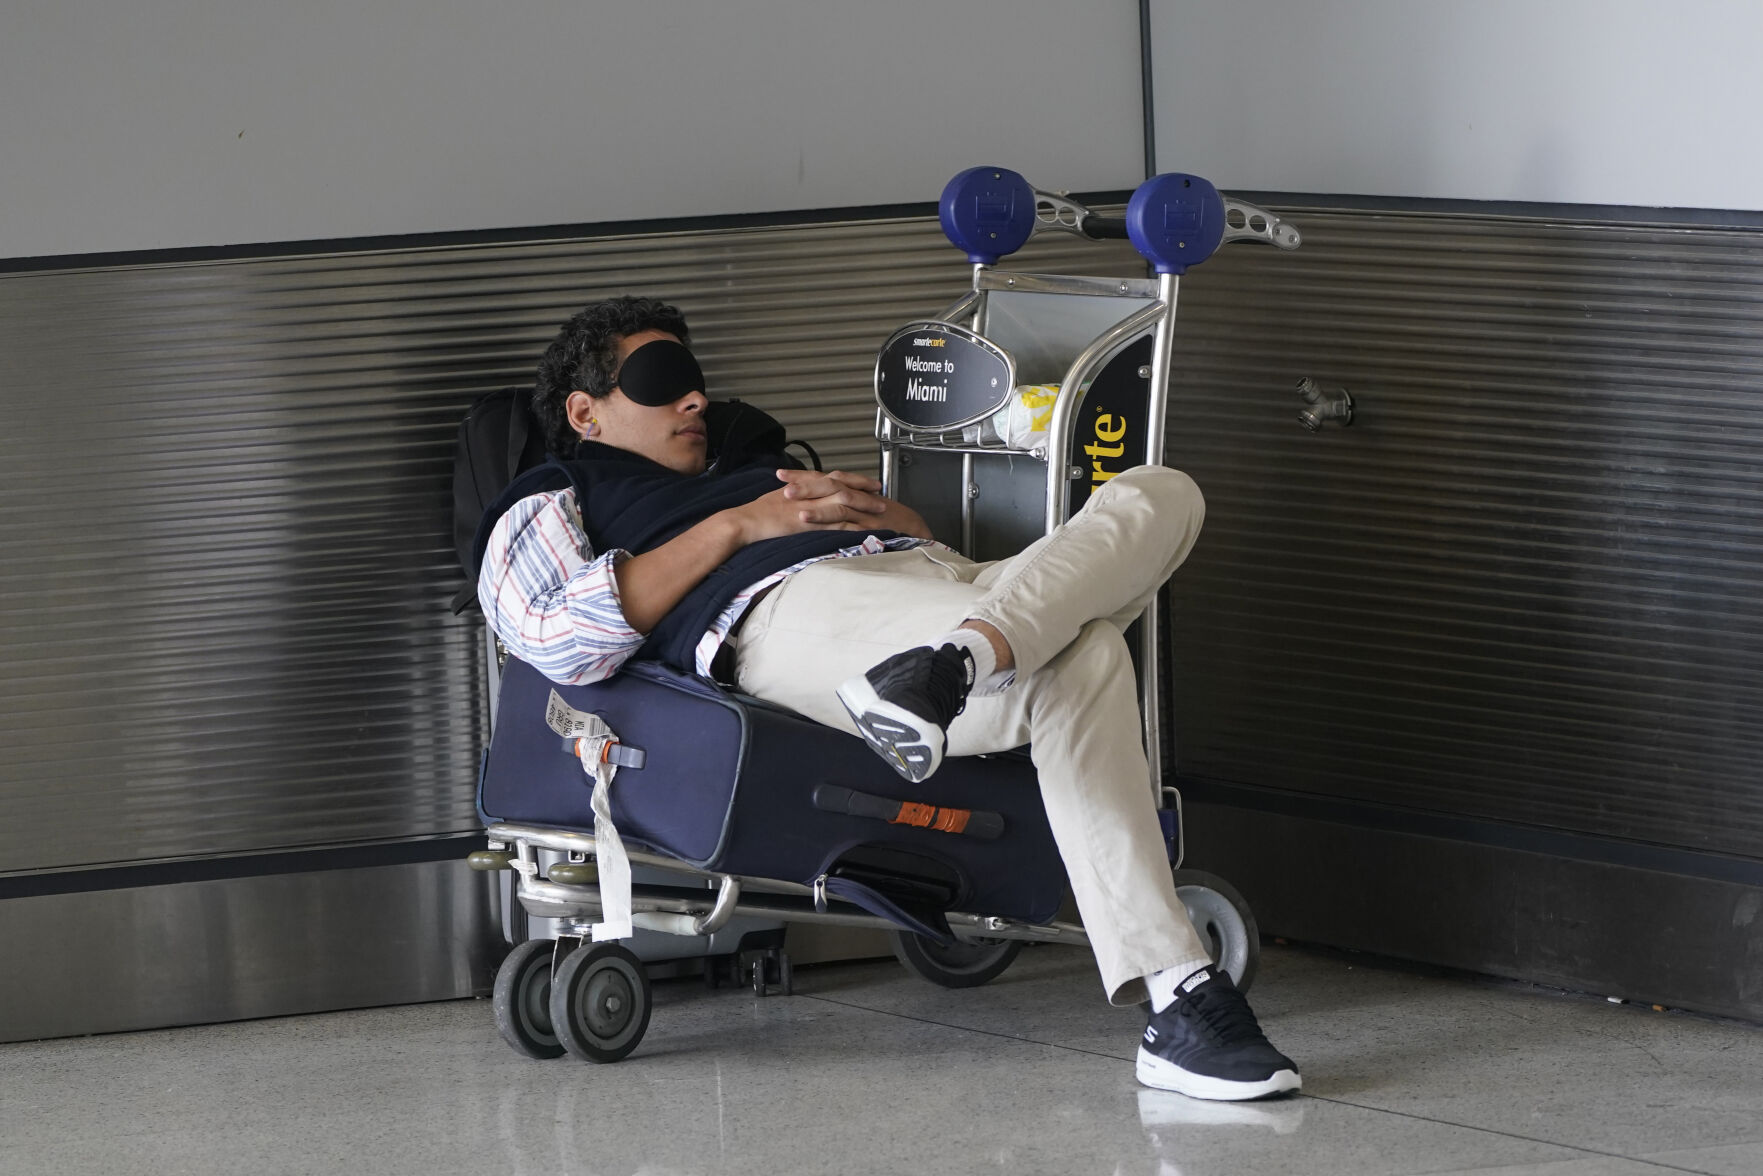 <p>FILE - A traveler takes a nap as he waits for a ride outside Miami International Airport, Friday, July 1, 2022, in Miami. The Gallup survey, released Monday, April 15, 2024, says that a majority of Americans say they would feel better if they could have more sleep. But in the U.S., where the ethos of grinding and pulling yourself up by your own bootstraps is ubiquitous, getting enough sleep can seem like a dream. (AP Photo/Wilfredo Lee, File)</p>   PHOTO CREDIT: Wilfredo Lee